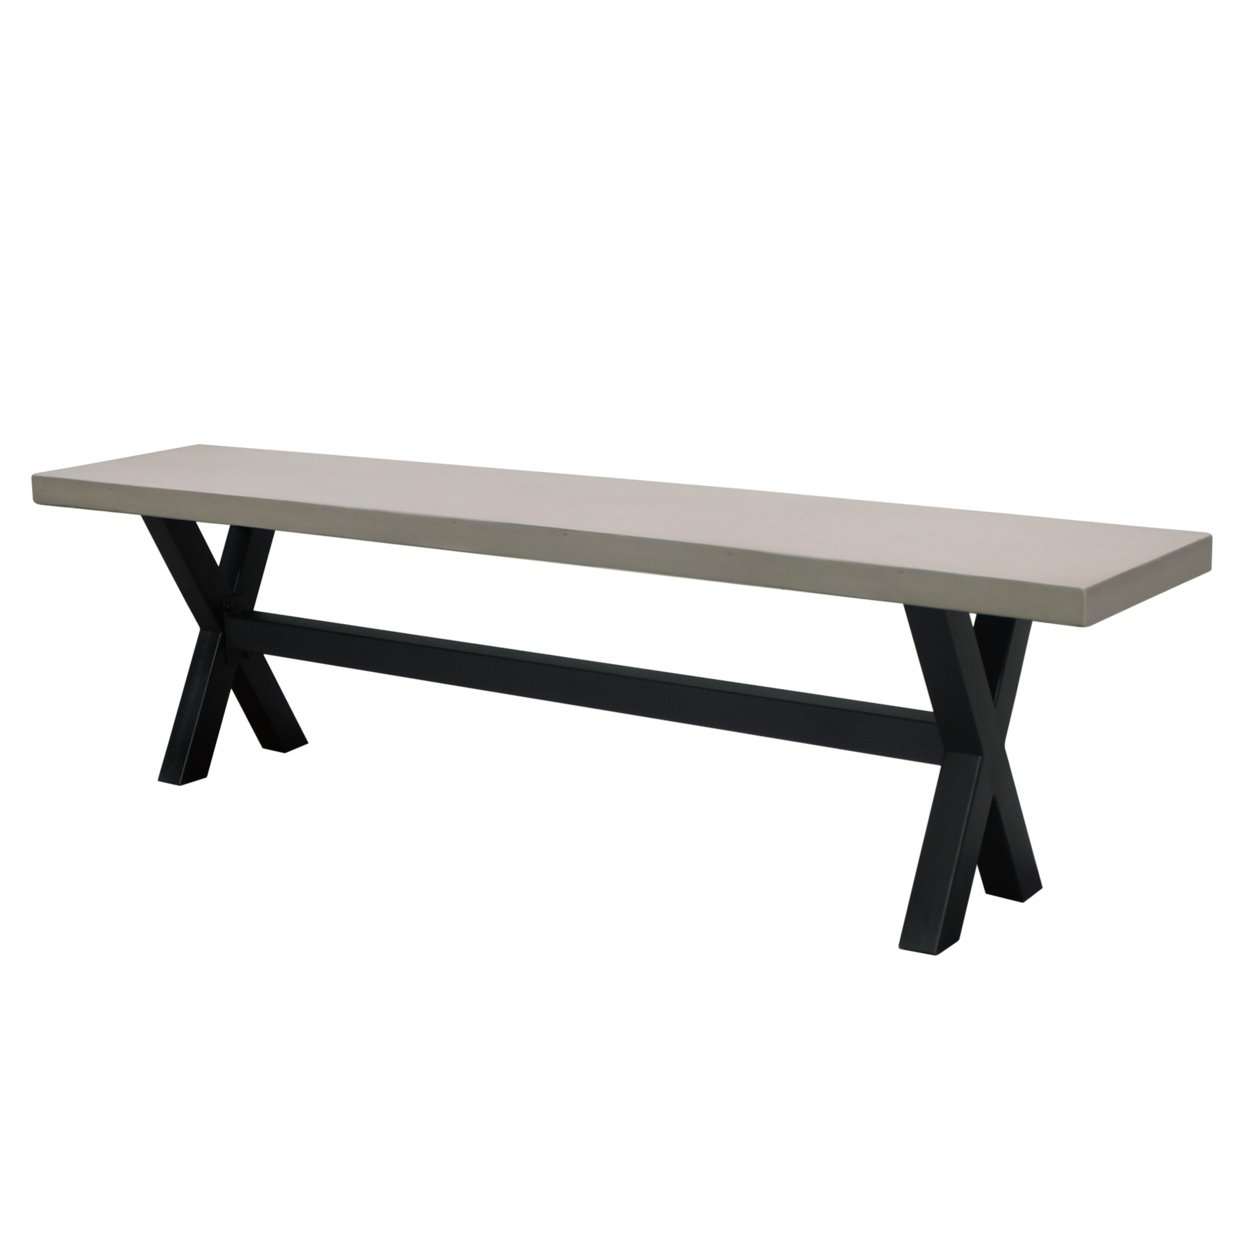 Malle Indoor Light Grey Finished Light-Weight Concrete Dining Bench